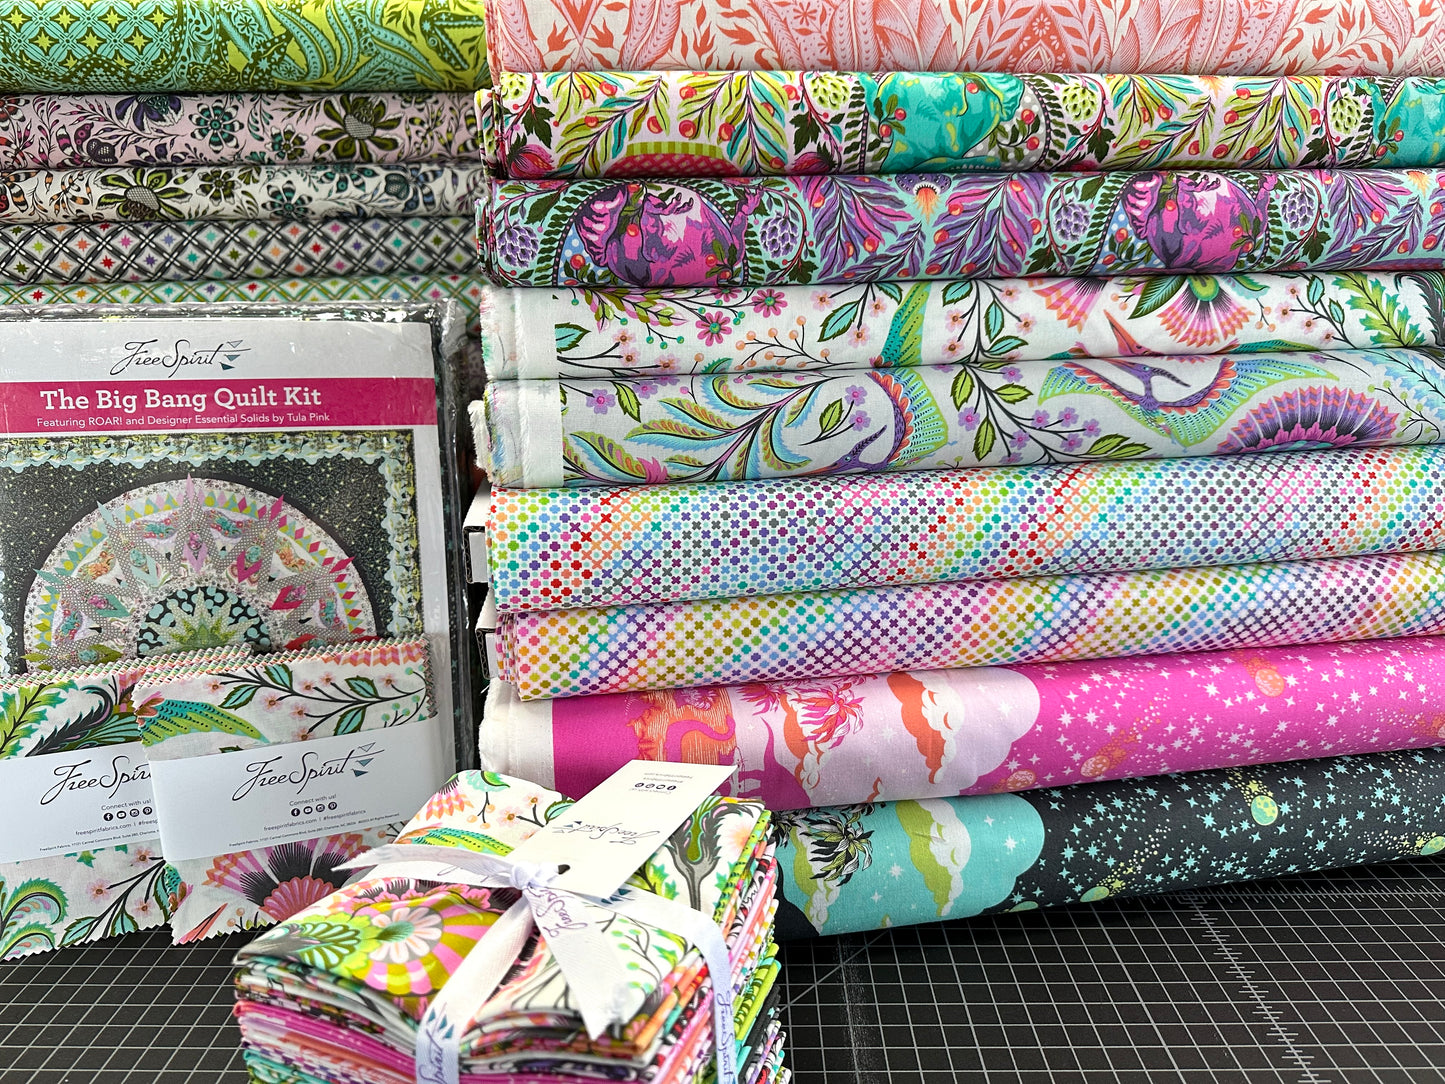 New Arrival: Roar! by Tula Pink The Big Bang Quilt Kit Featuring  and Solids by Tula Pink USA SHIPPING Included in Price  KIT2QTTP.BIGBANG Kit